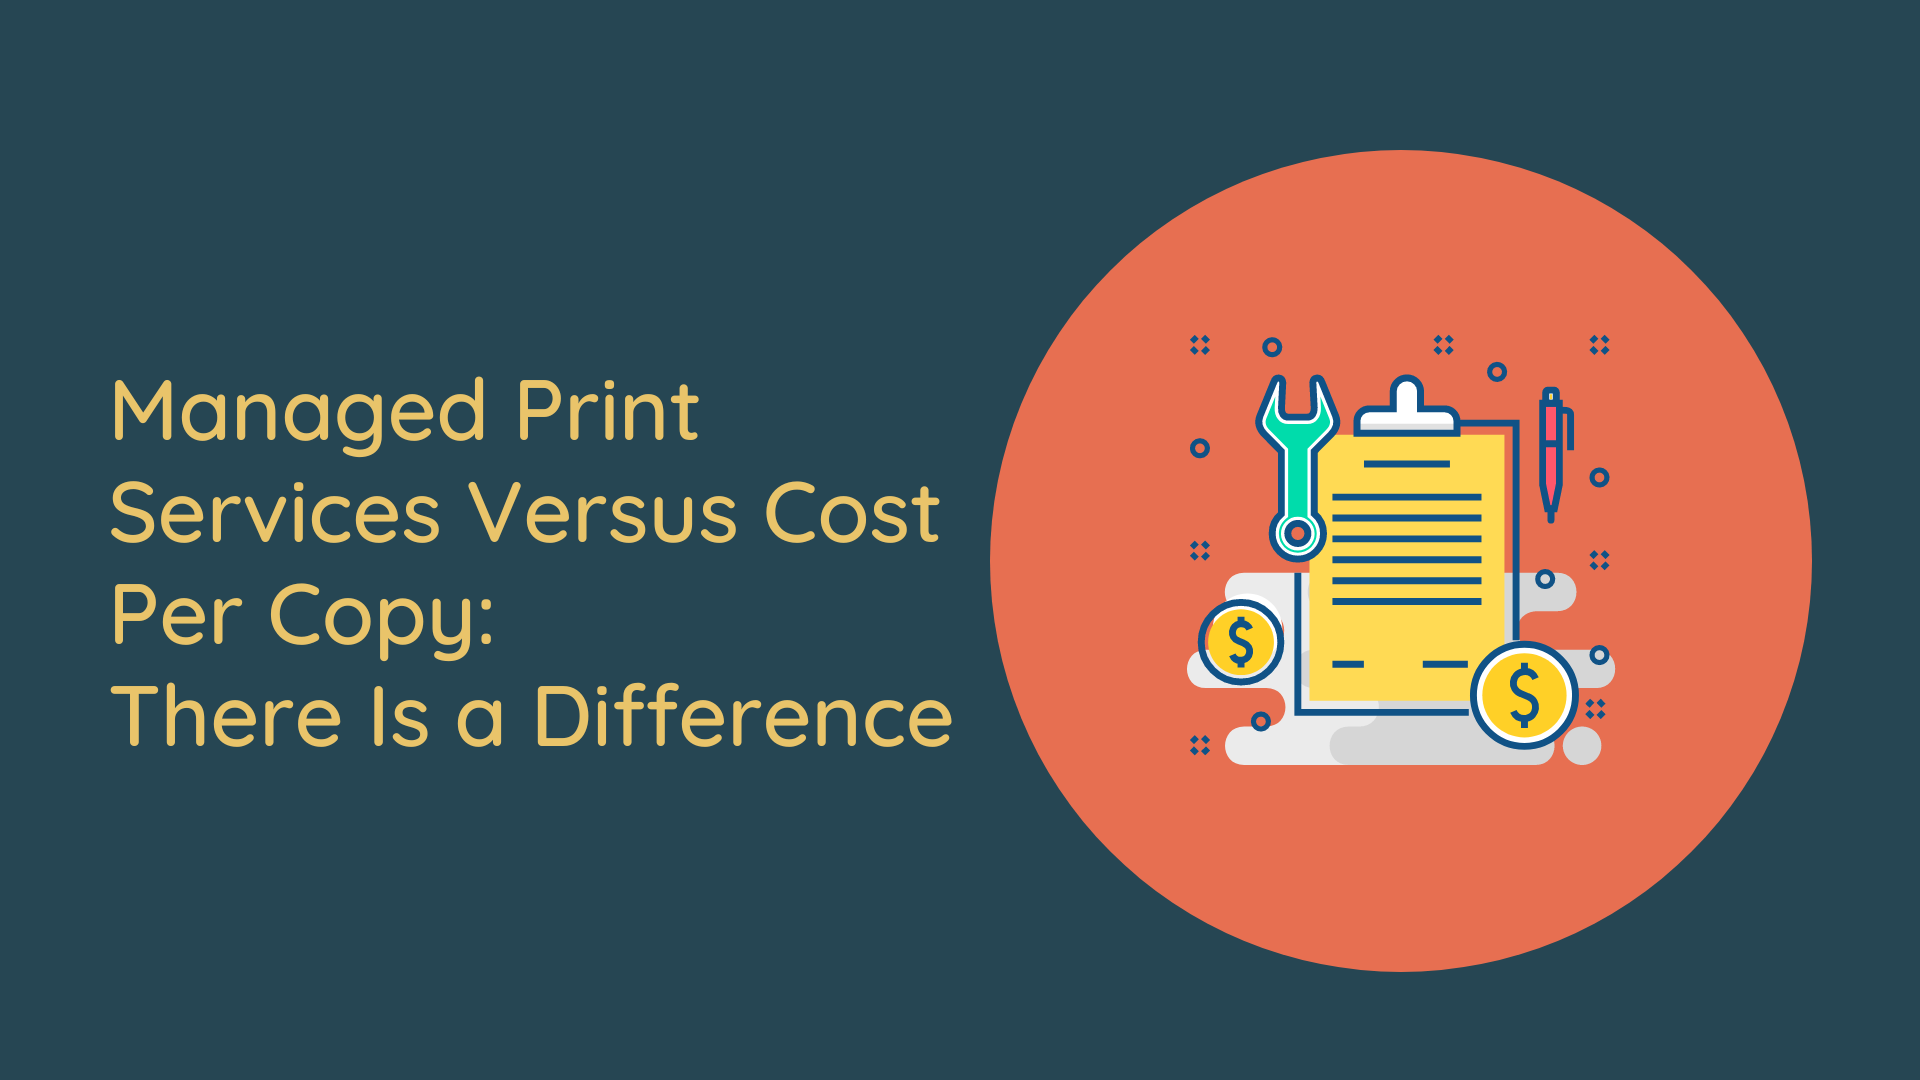 Managed Print Services Versus Cost Per Copy There Is a Difference